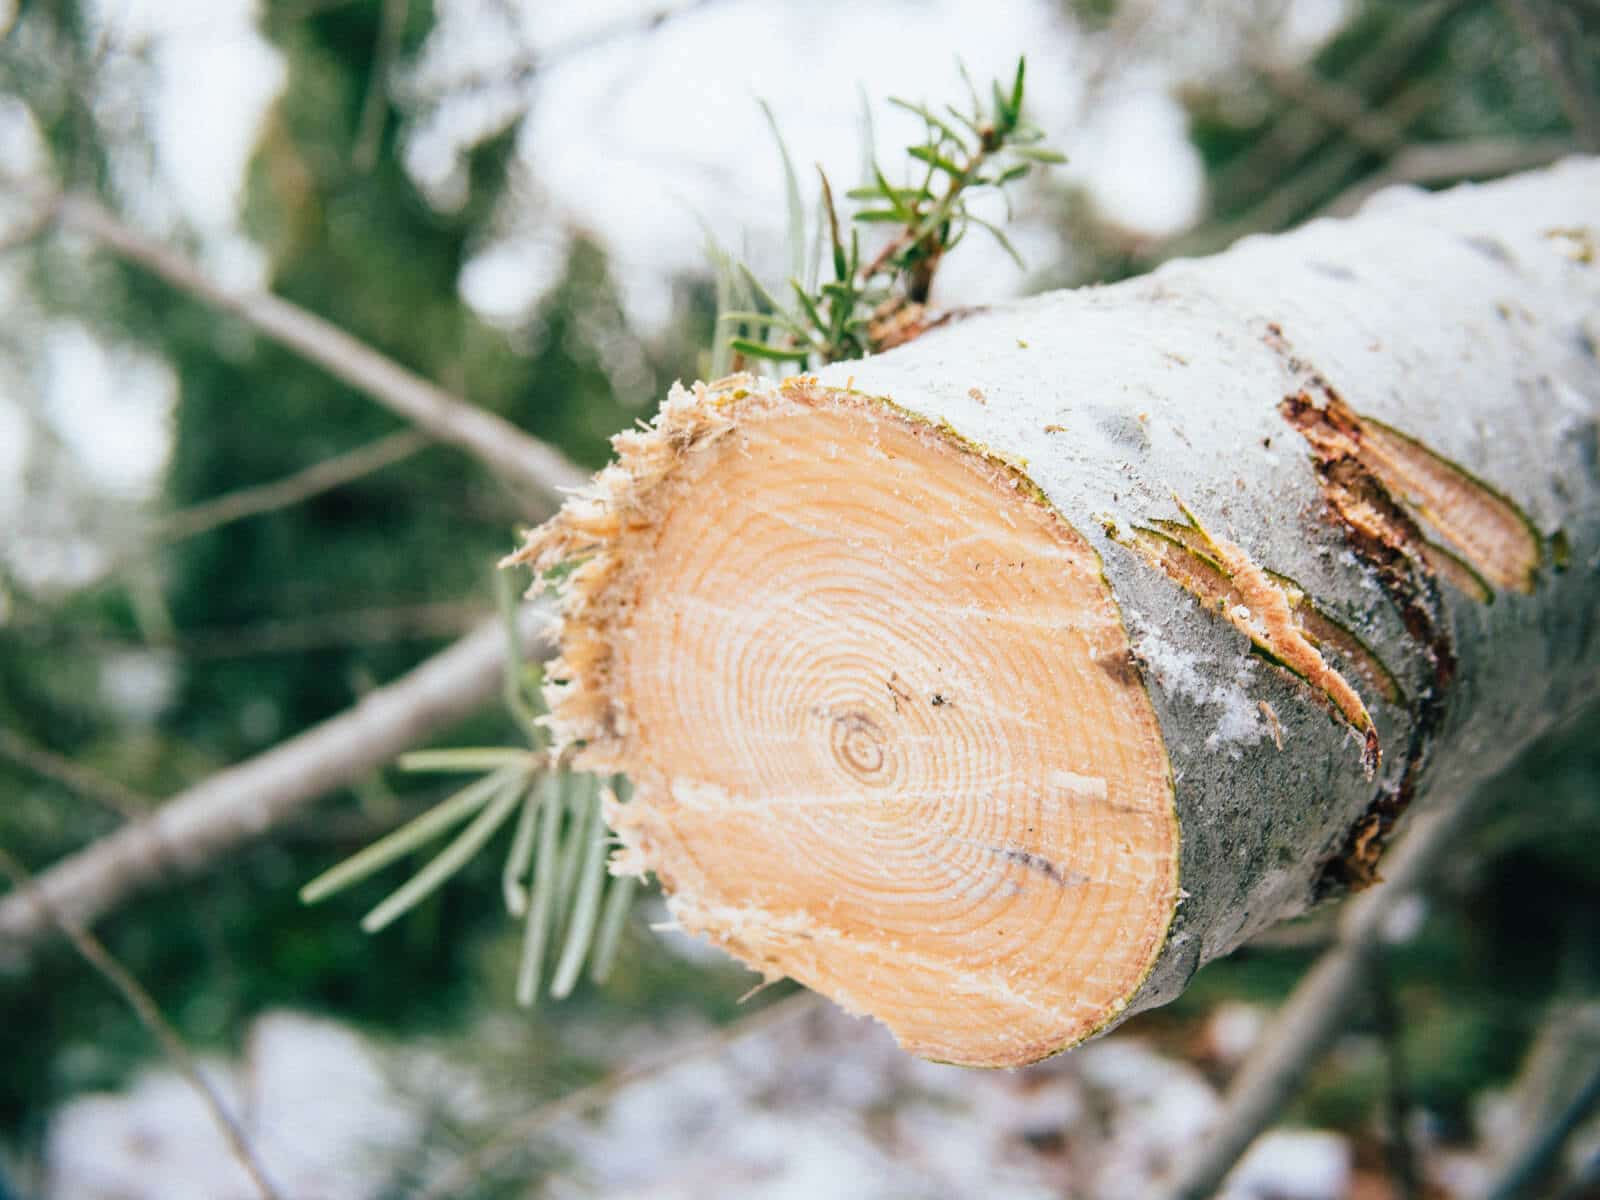 Make a clean, straight cut across the base of the tree